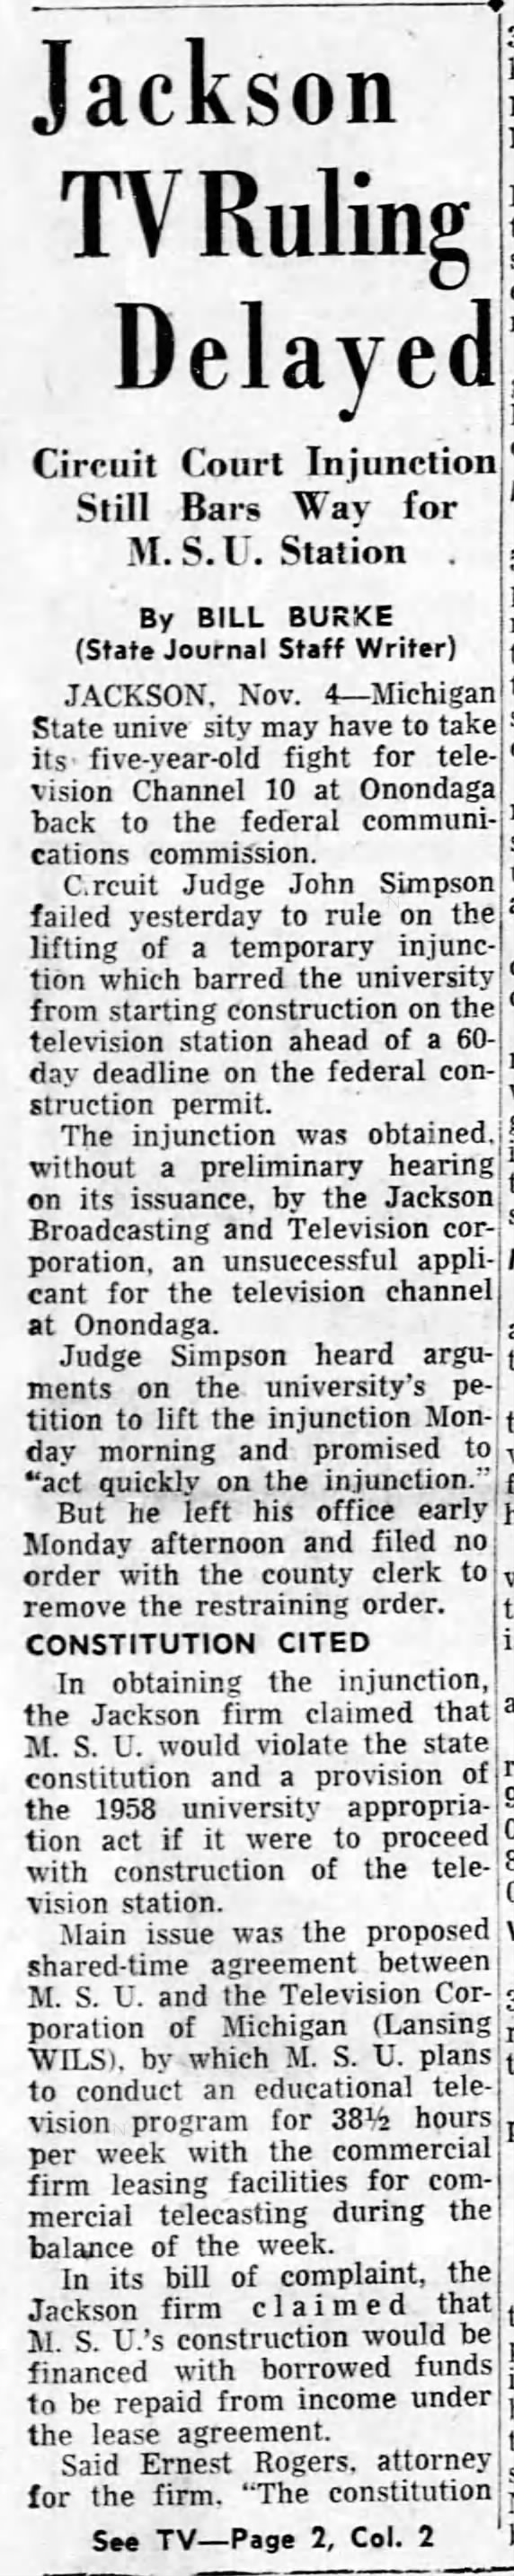 Jackson TV Ruling Delayed: Circuit Court Injunction Still Bars Way for M.S.U. Station